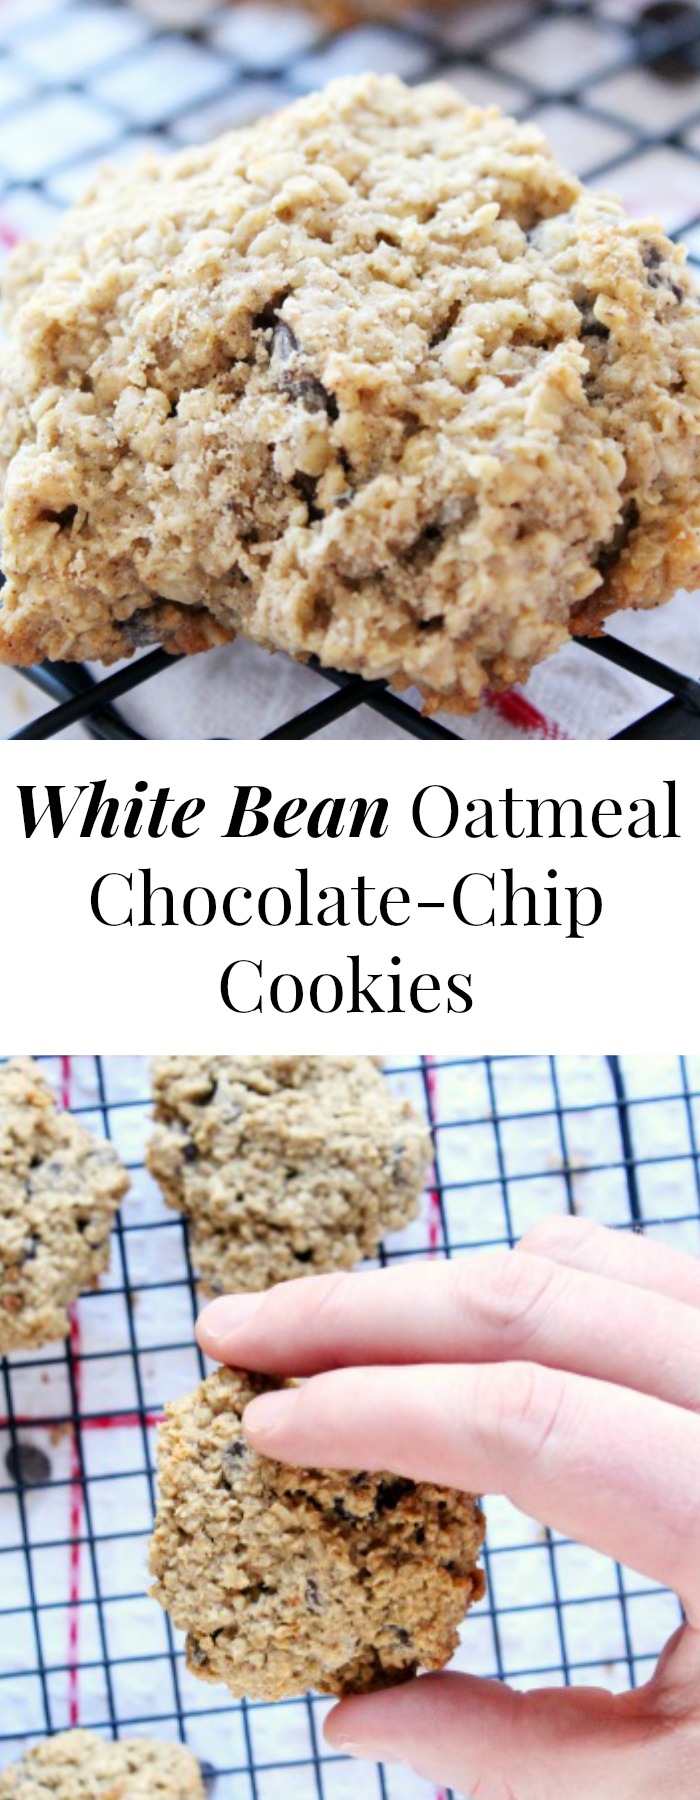 UntitledOatmeal Chocolate-Chip (and Bean!) Cookies Gluten-Free Healthy